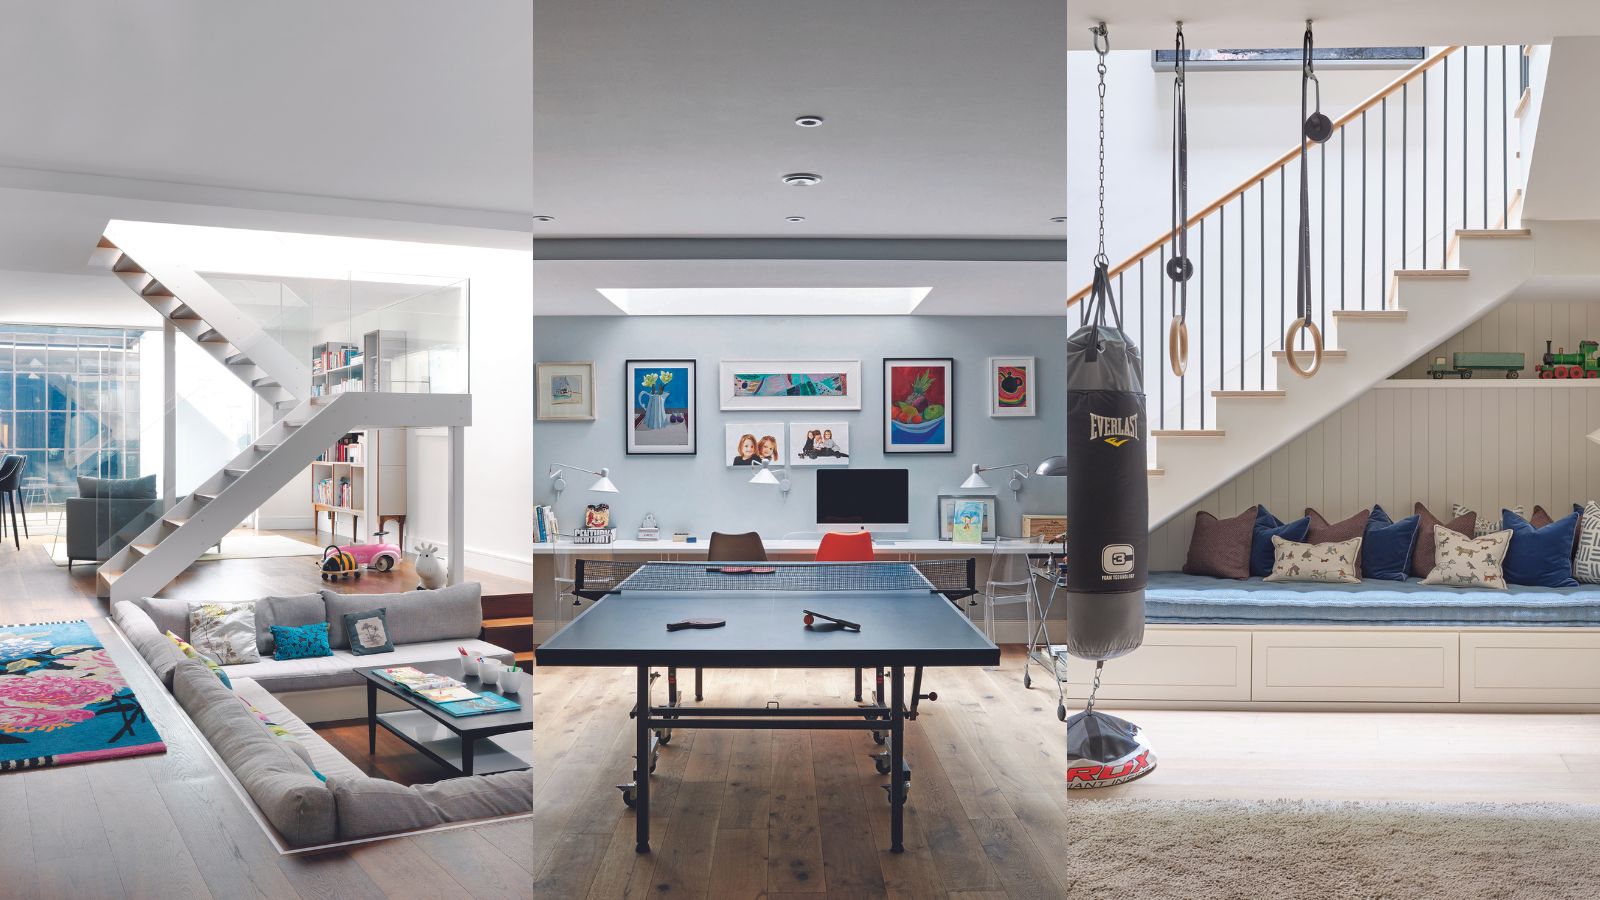 basement games room ideas: 7 looks for family night's in |